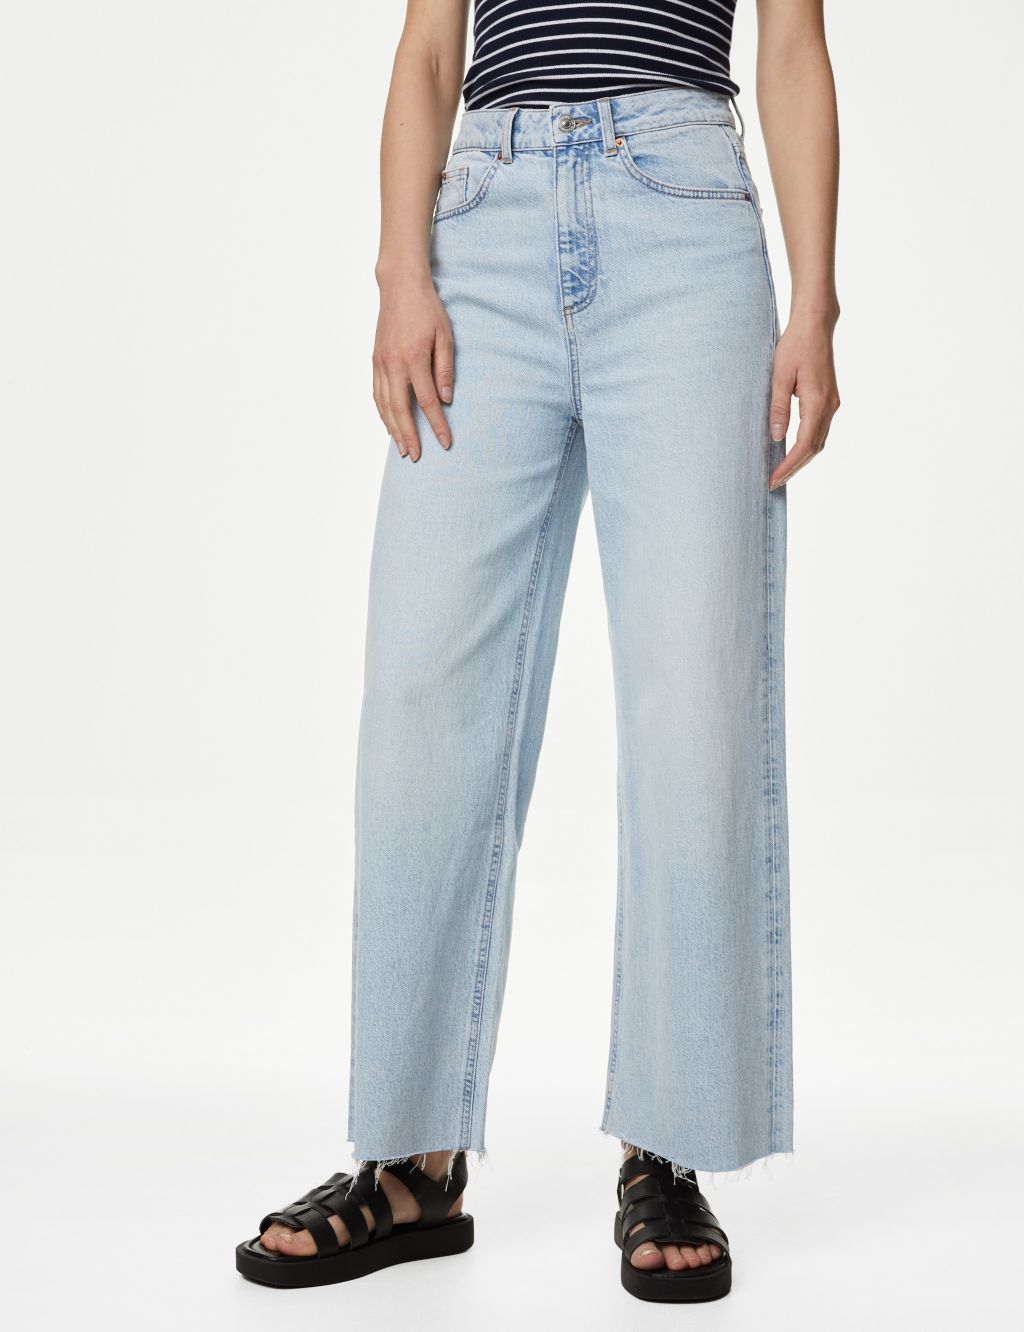 High Waisted Wide Leg Ankle Grazer Jeans image 2